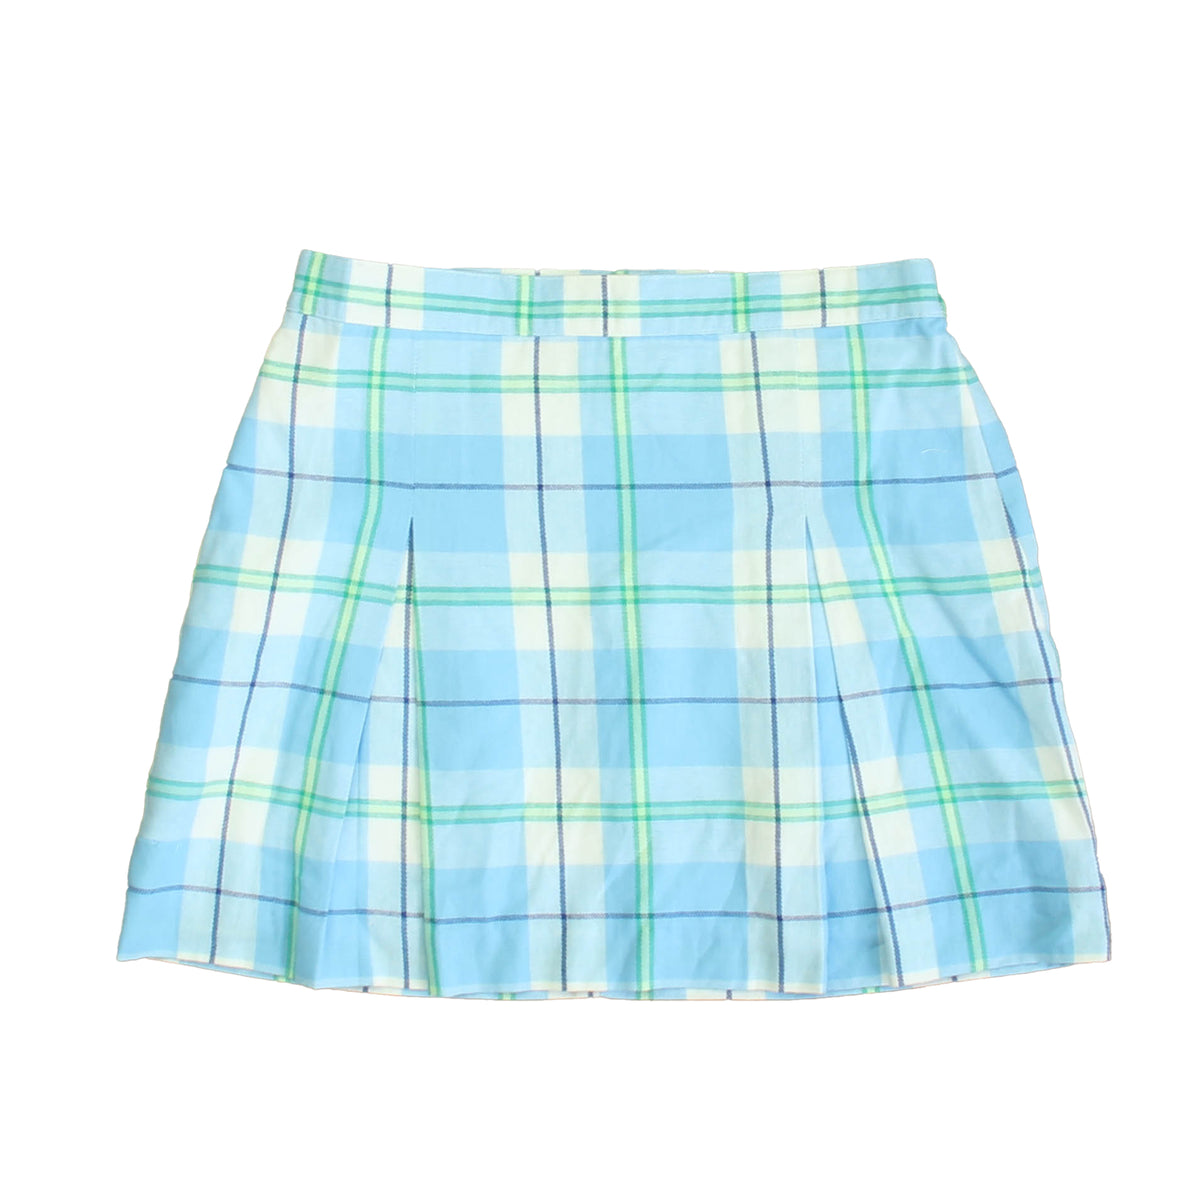 New with Tags: Noraton Plaid Skirt size: 2-5T -- FINAL SALE